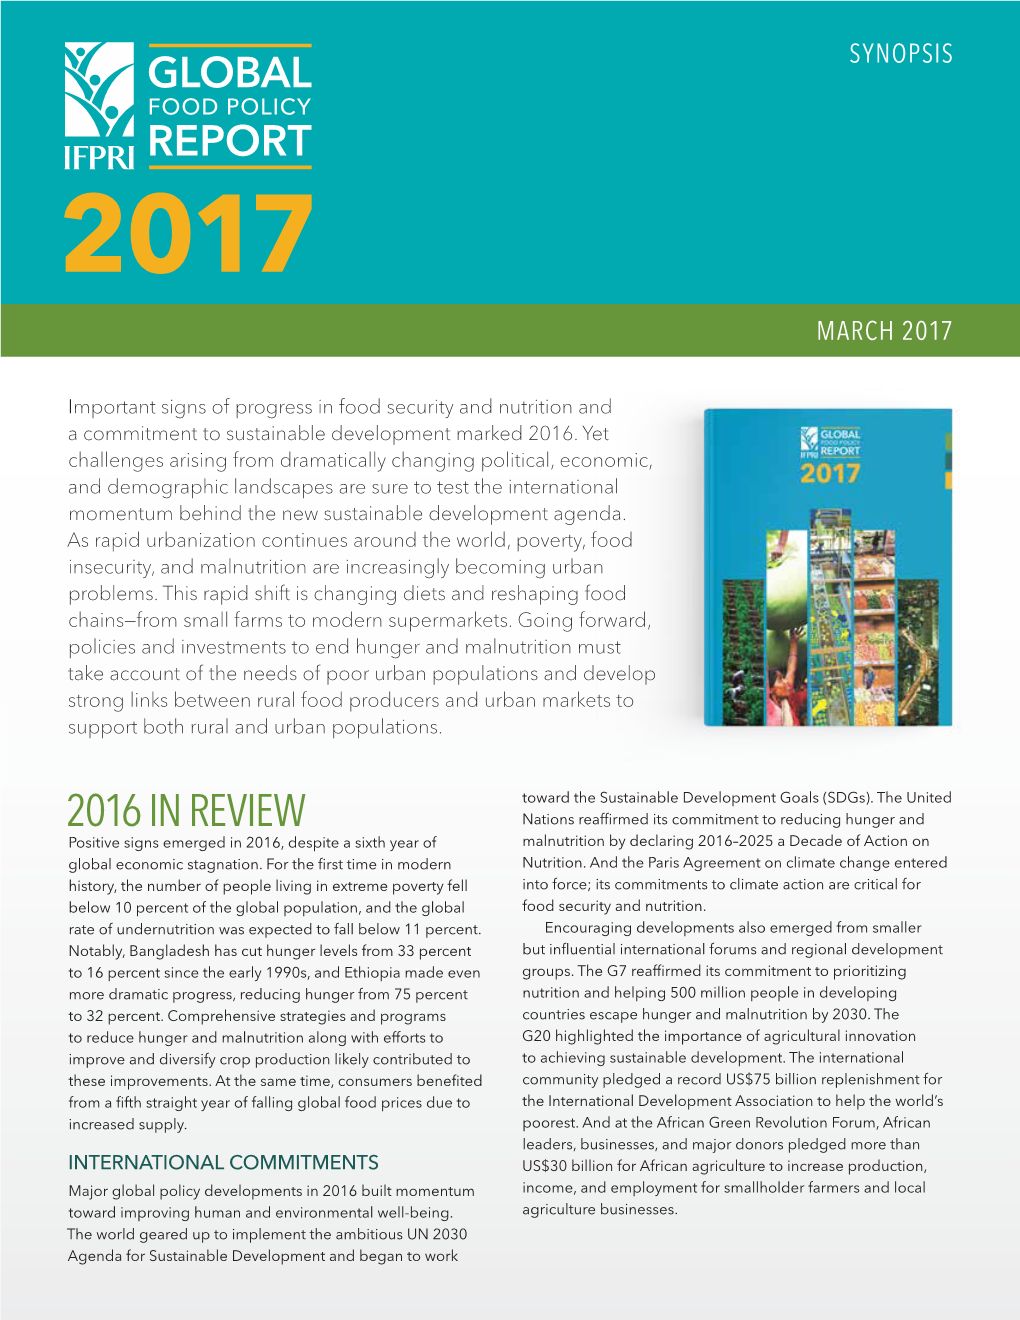 Synopsis: 2017 Global Food Policy Report